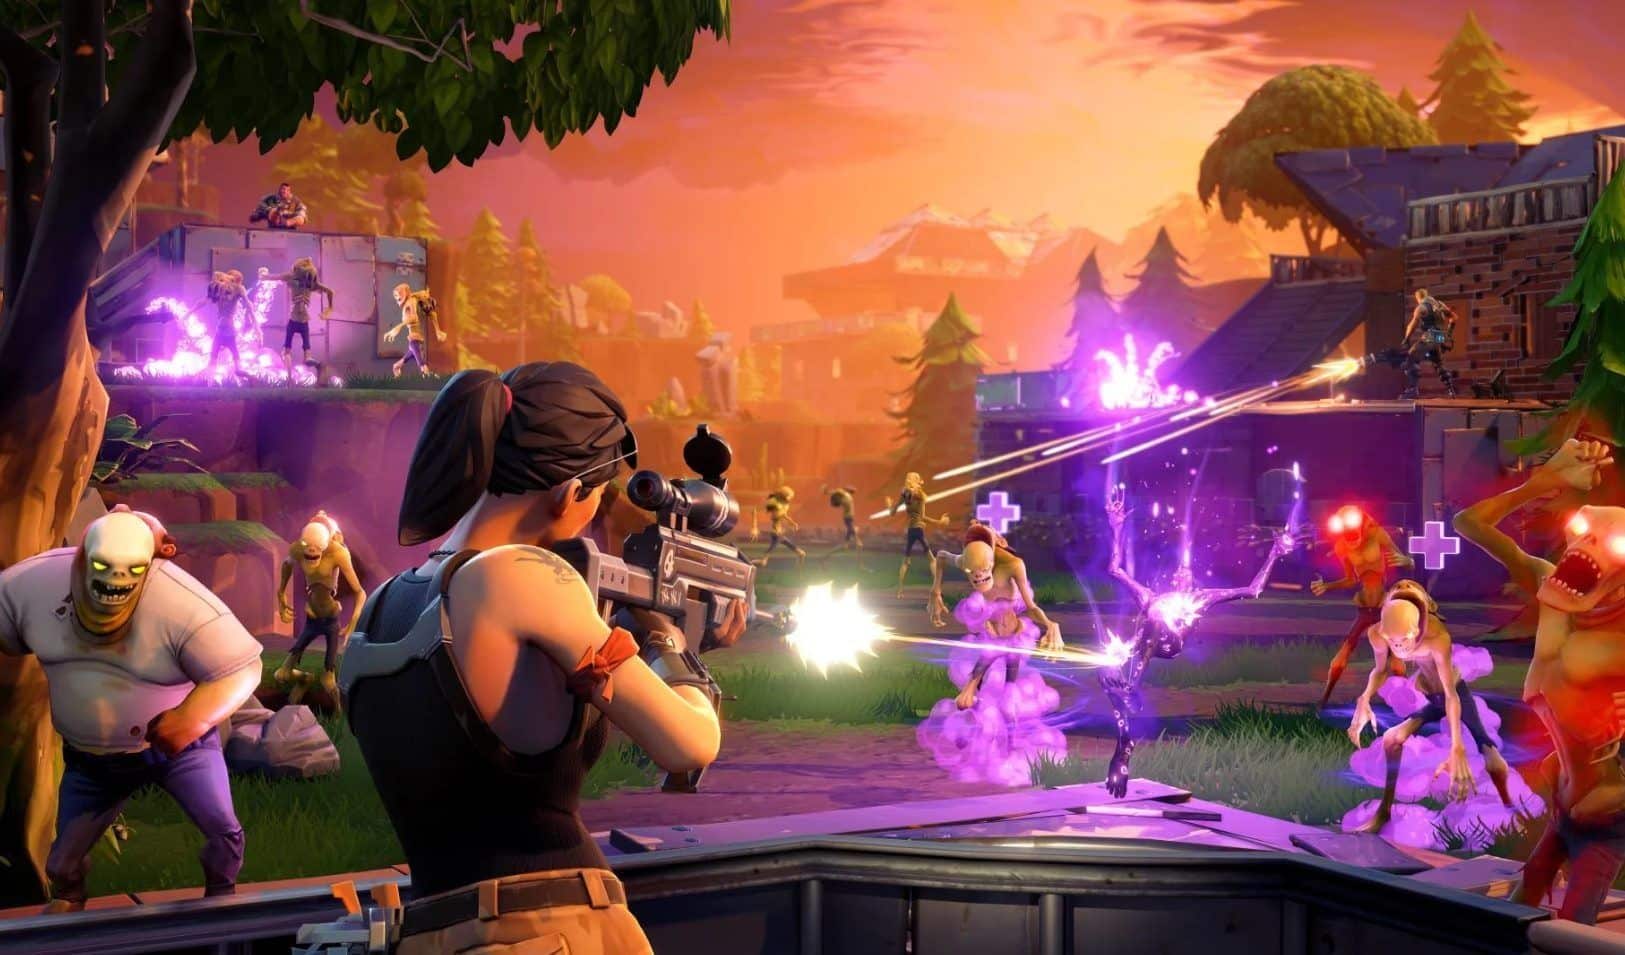 The main character defending against zombies in Save The World.